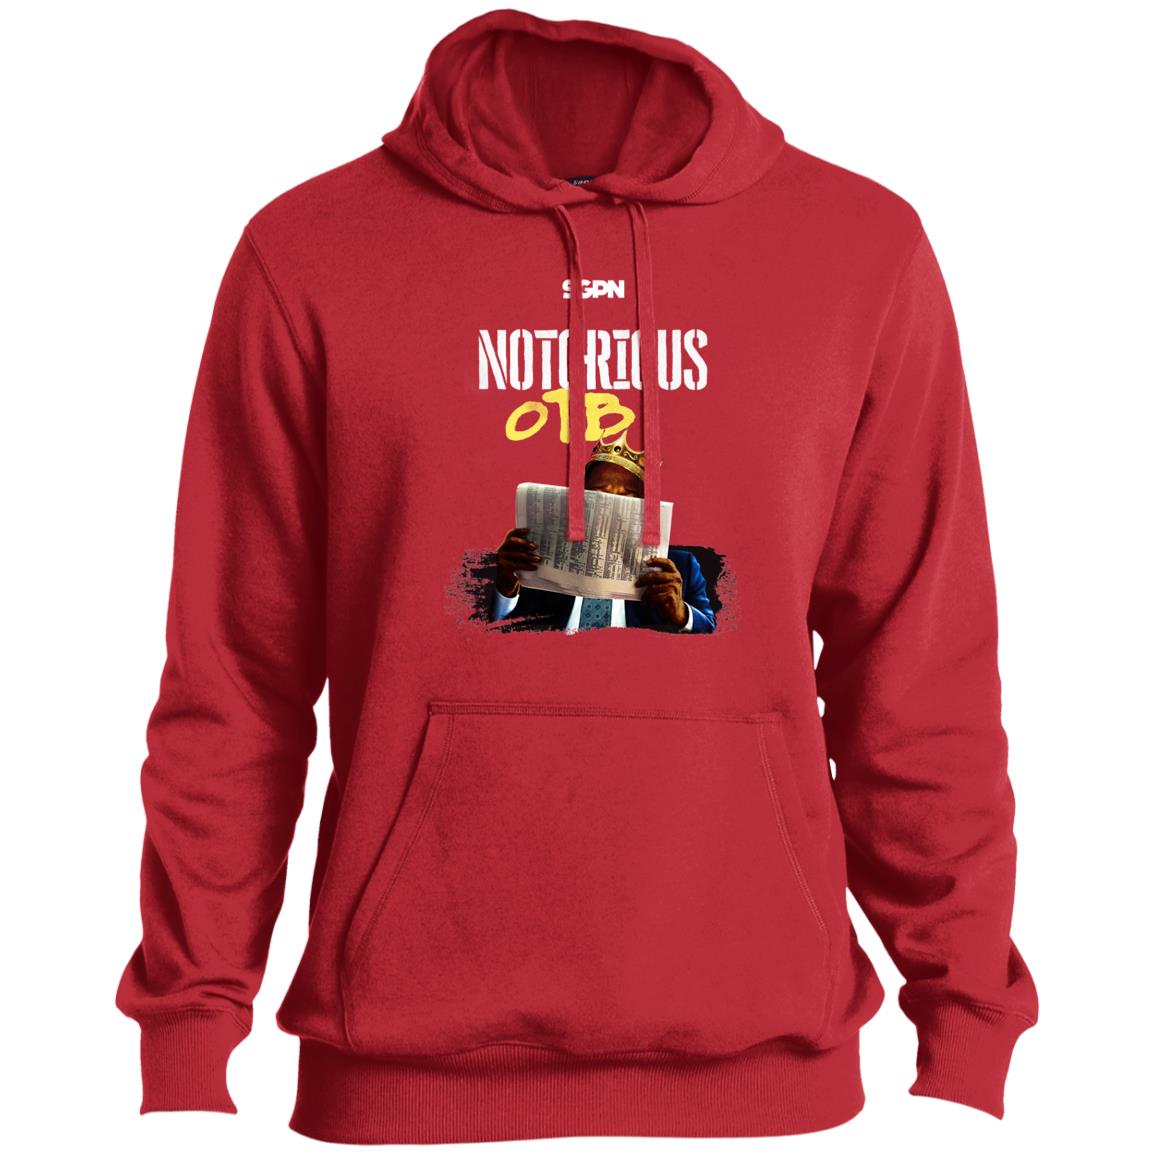 Notorious OTB Pullover Hoodie